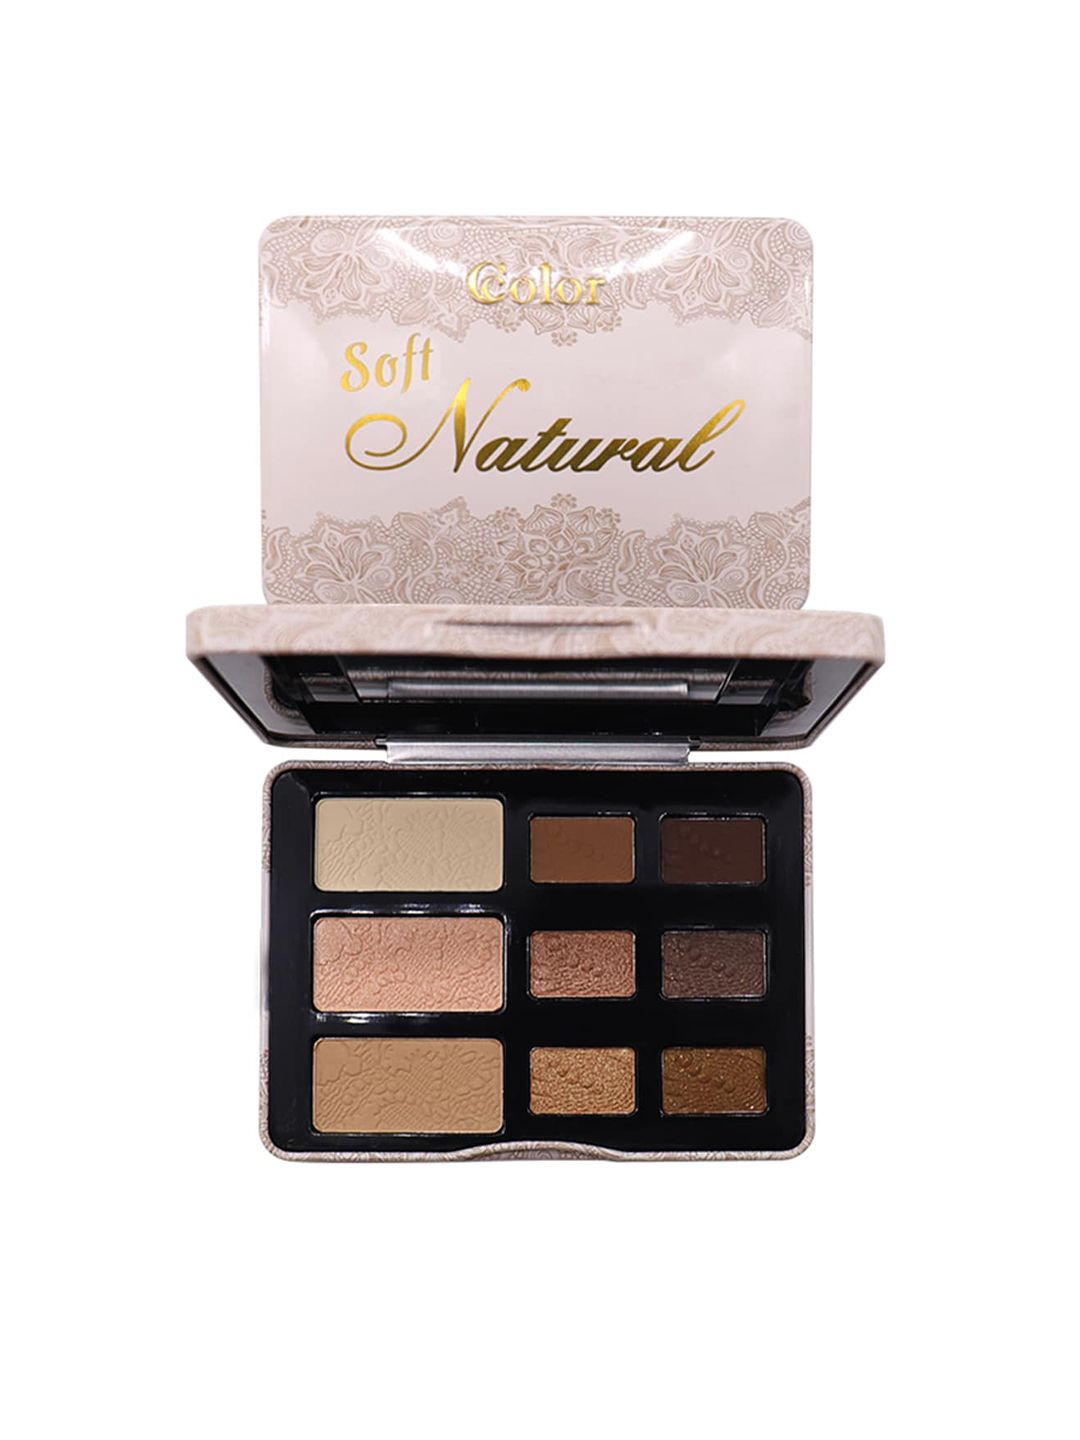 Okalan Soft Natural 9 Color Eyeshadow Palette Price in India